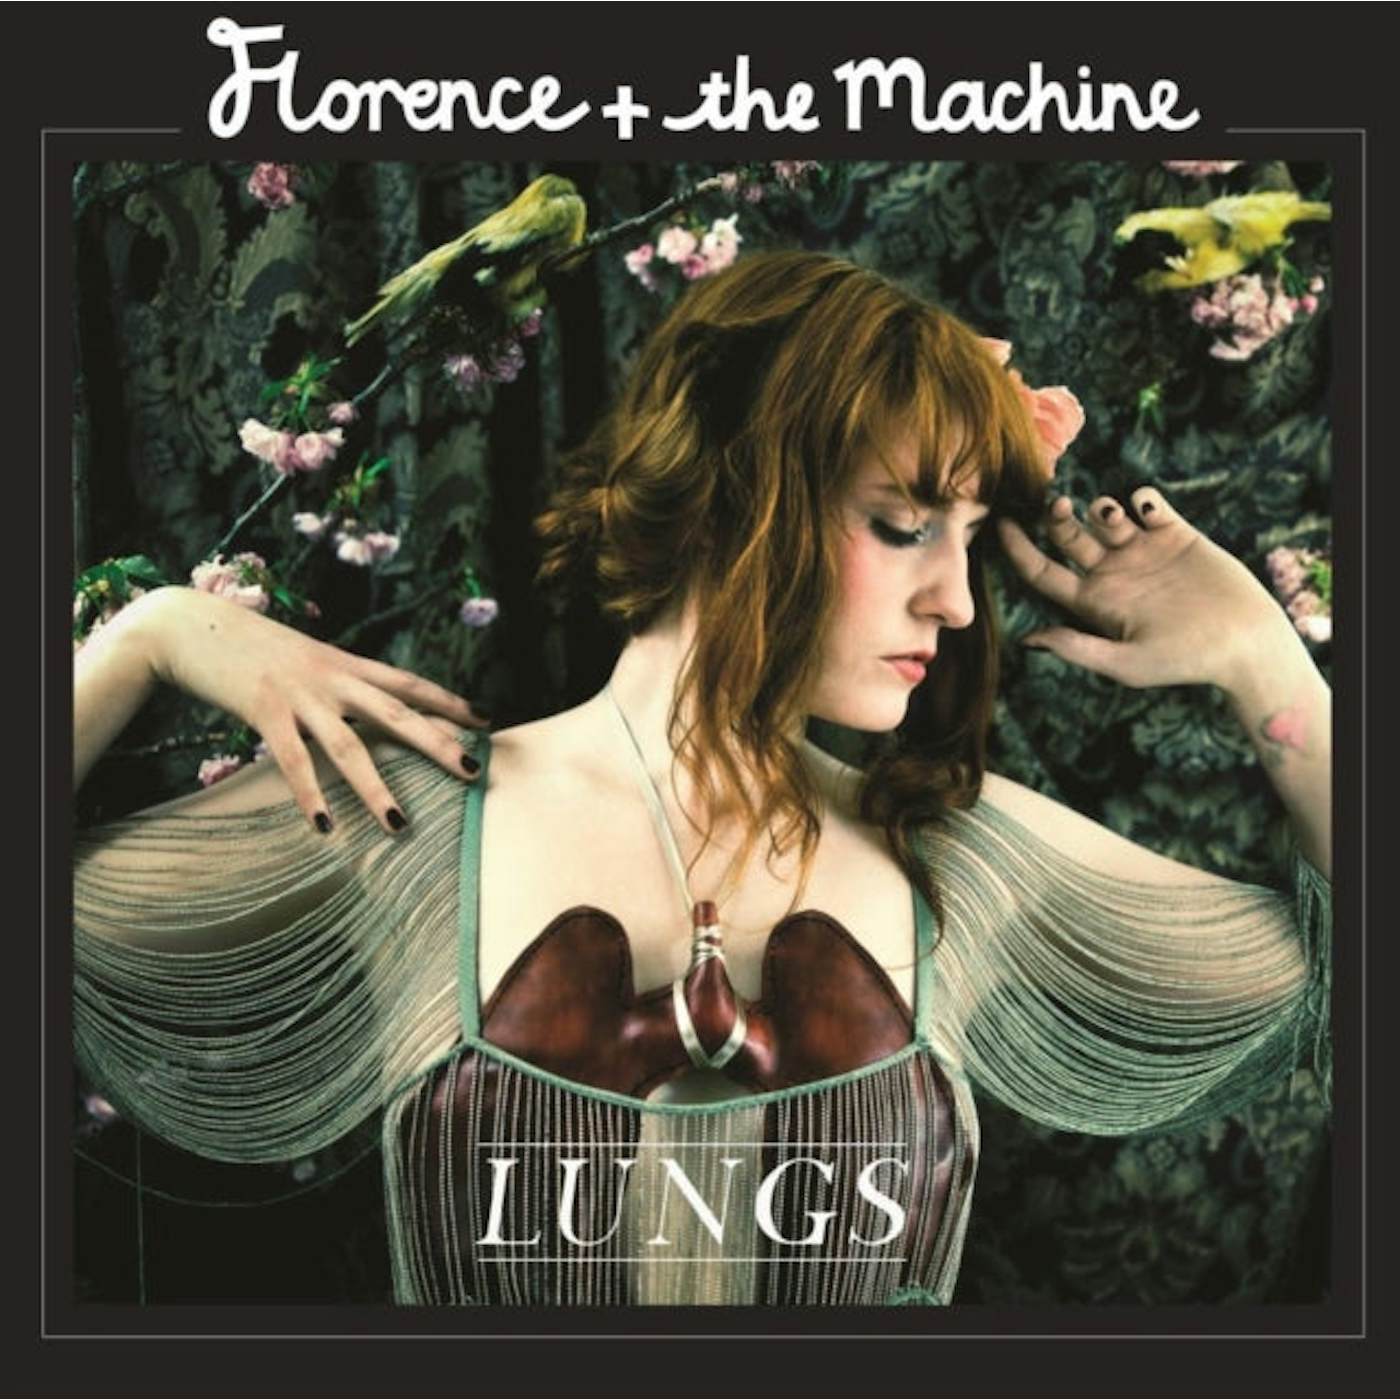 Florence + The Machine LP Vinyl Record - Lungs